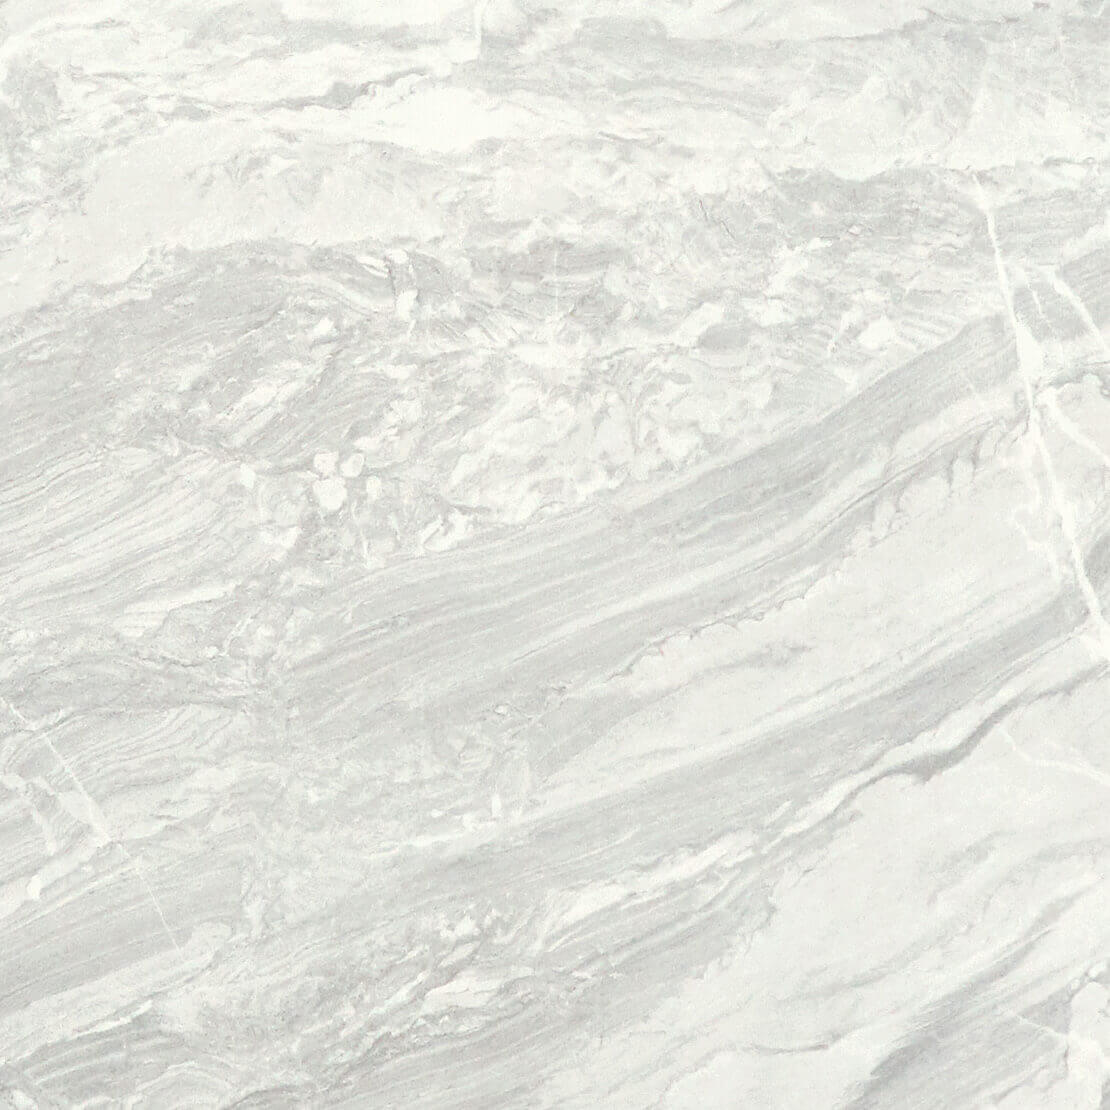 White Veined Marble Close Up View